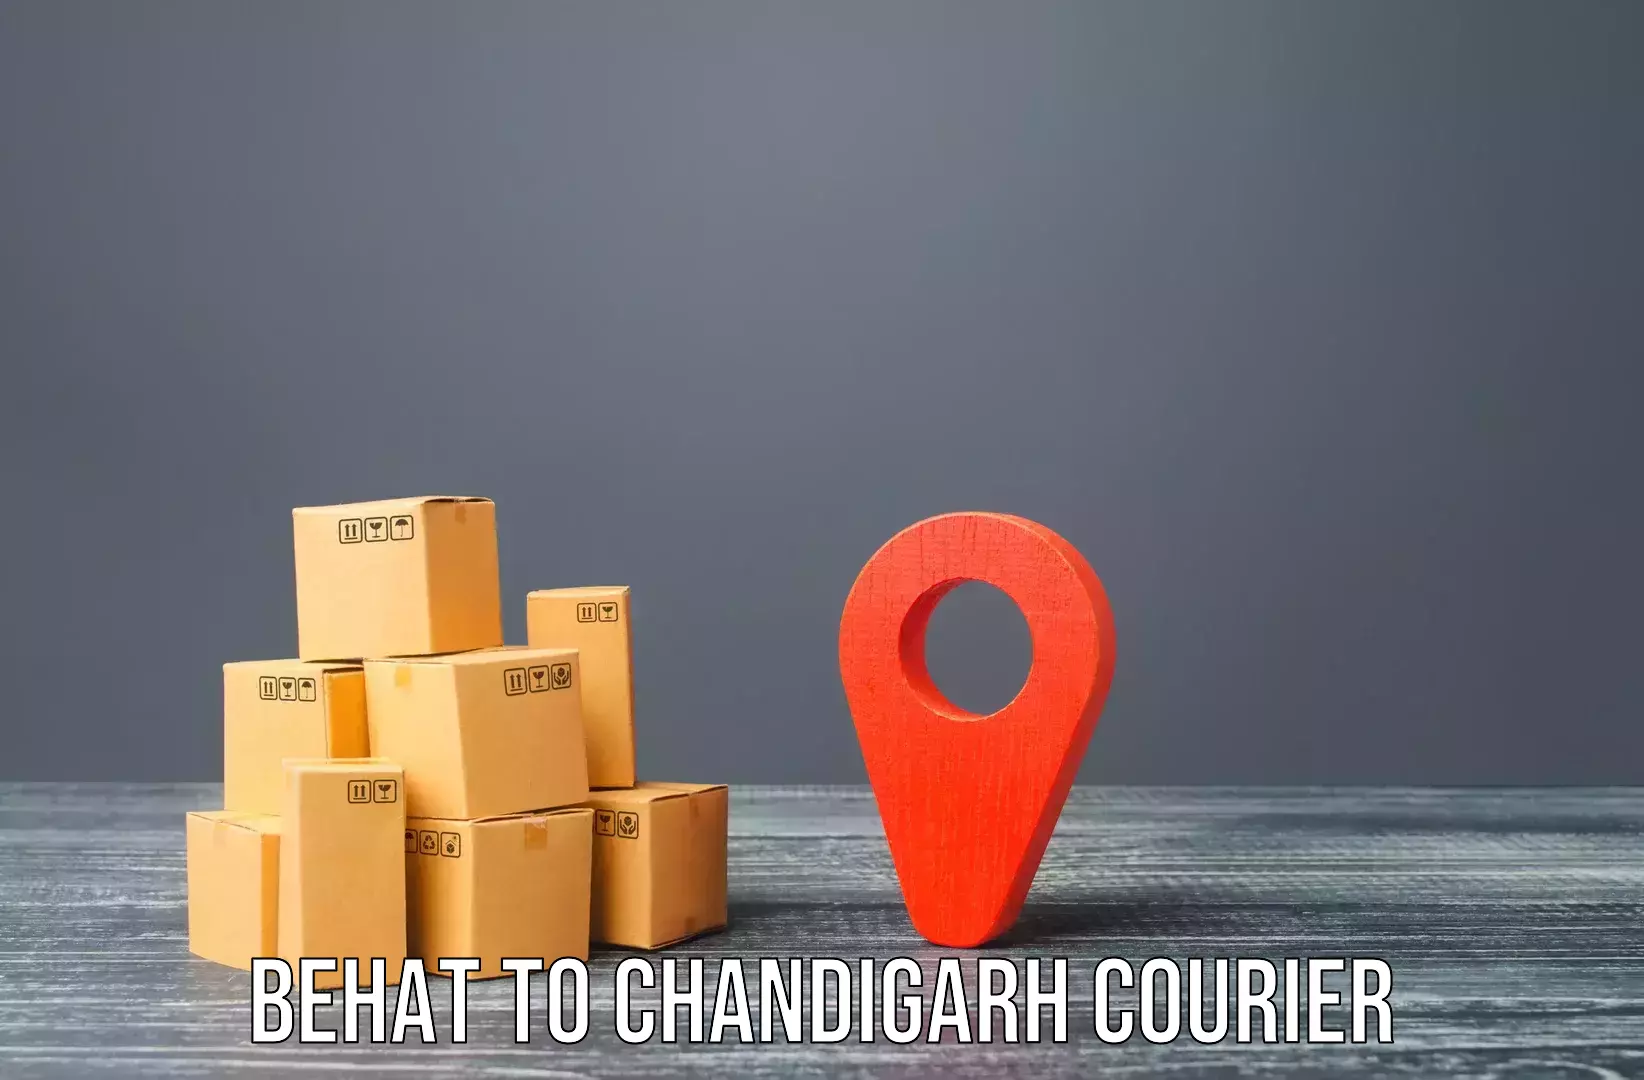 Furniture delivery service in Behat to Chandigarh